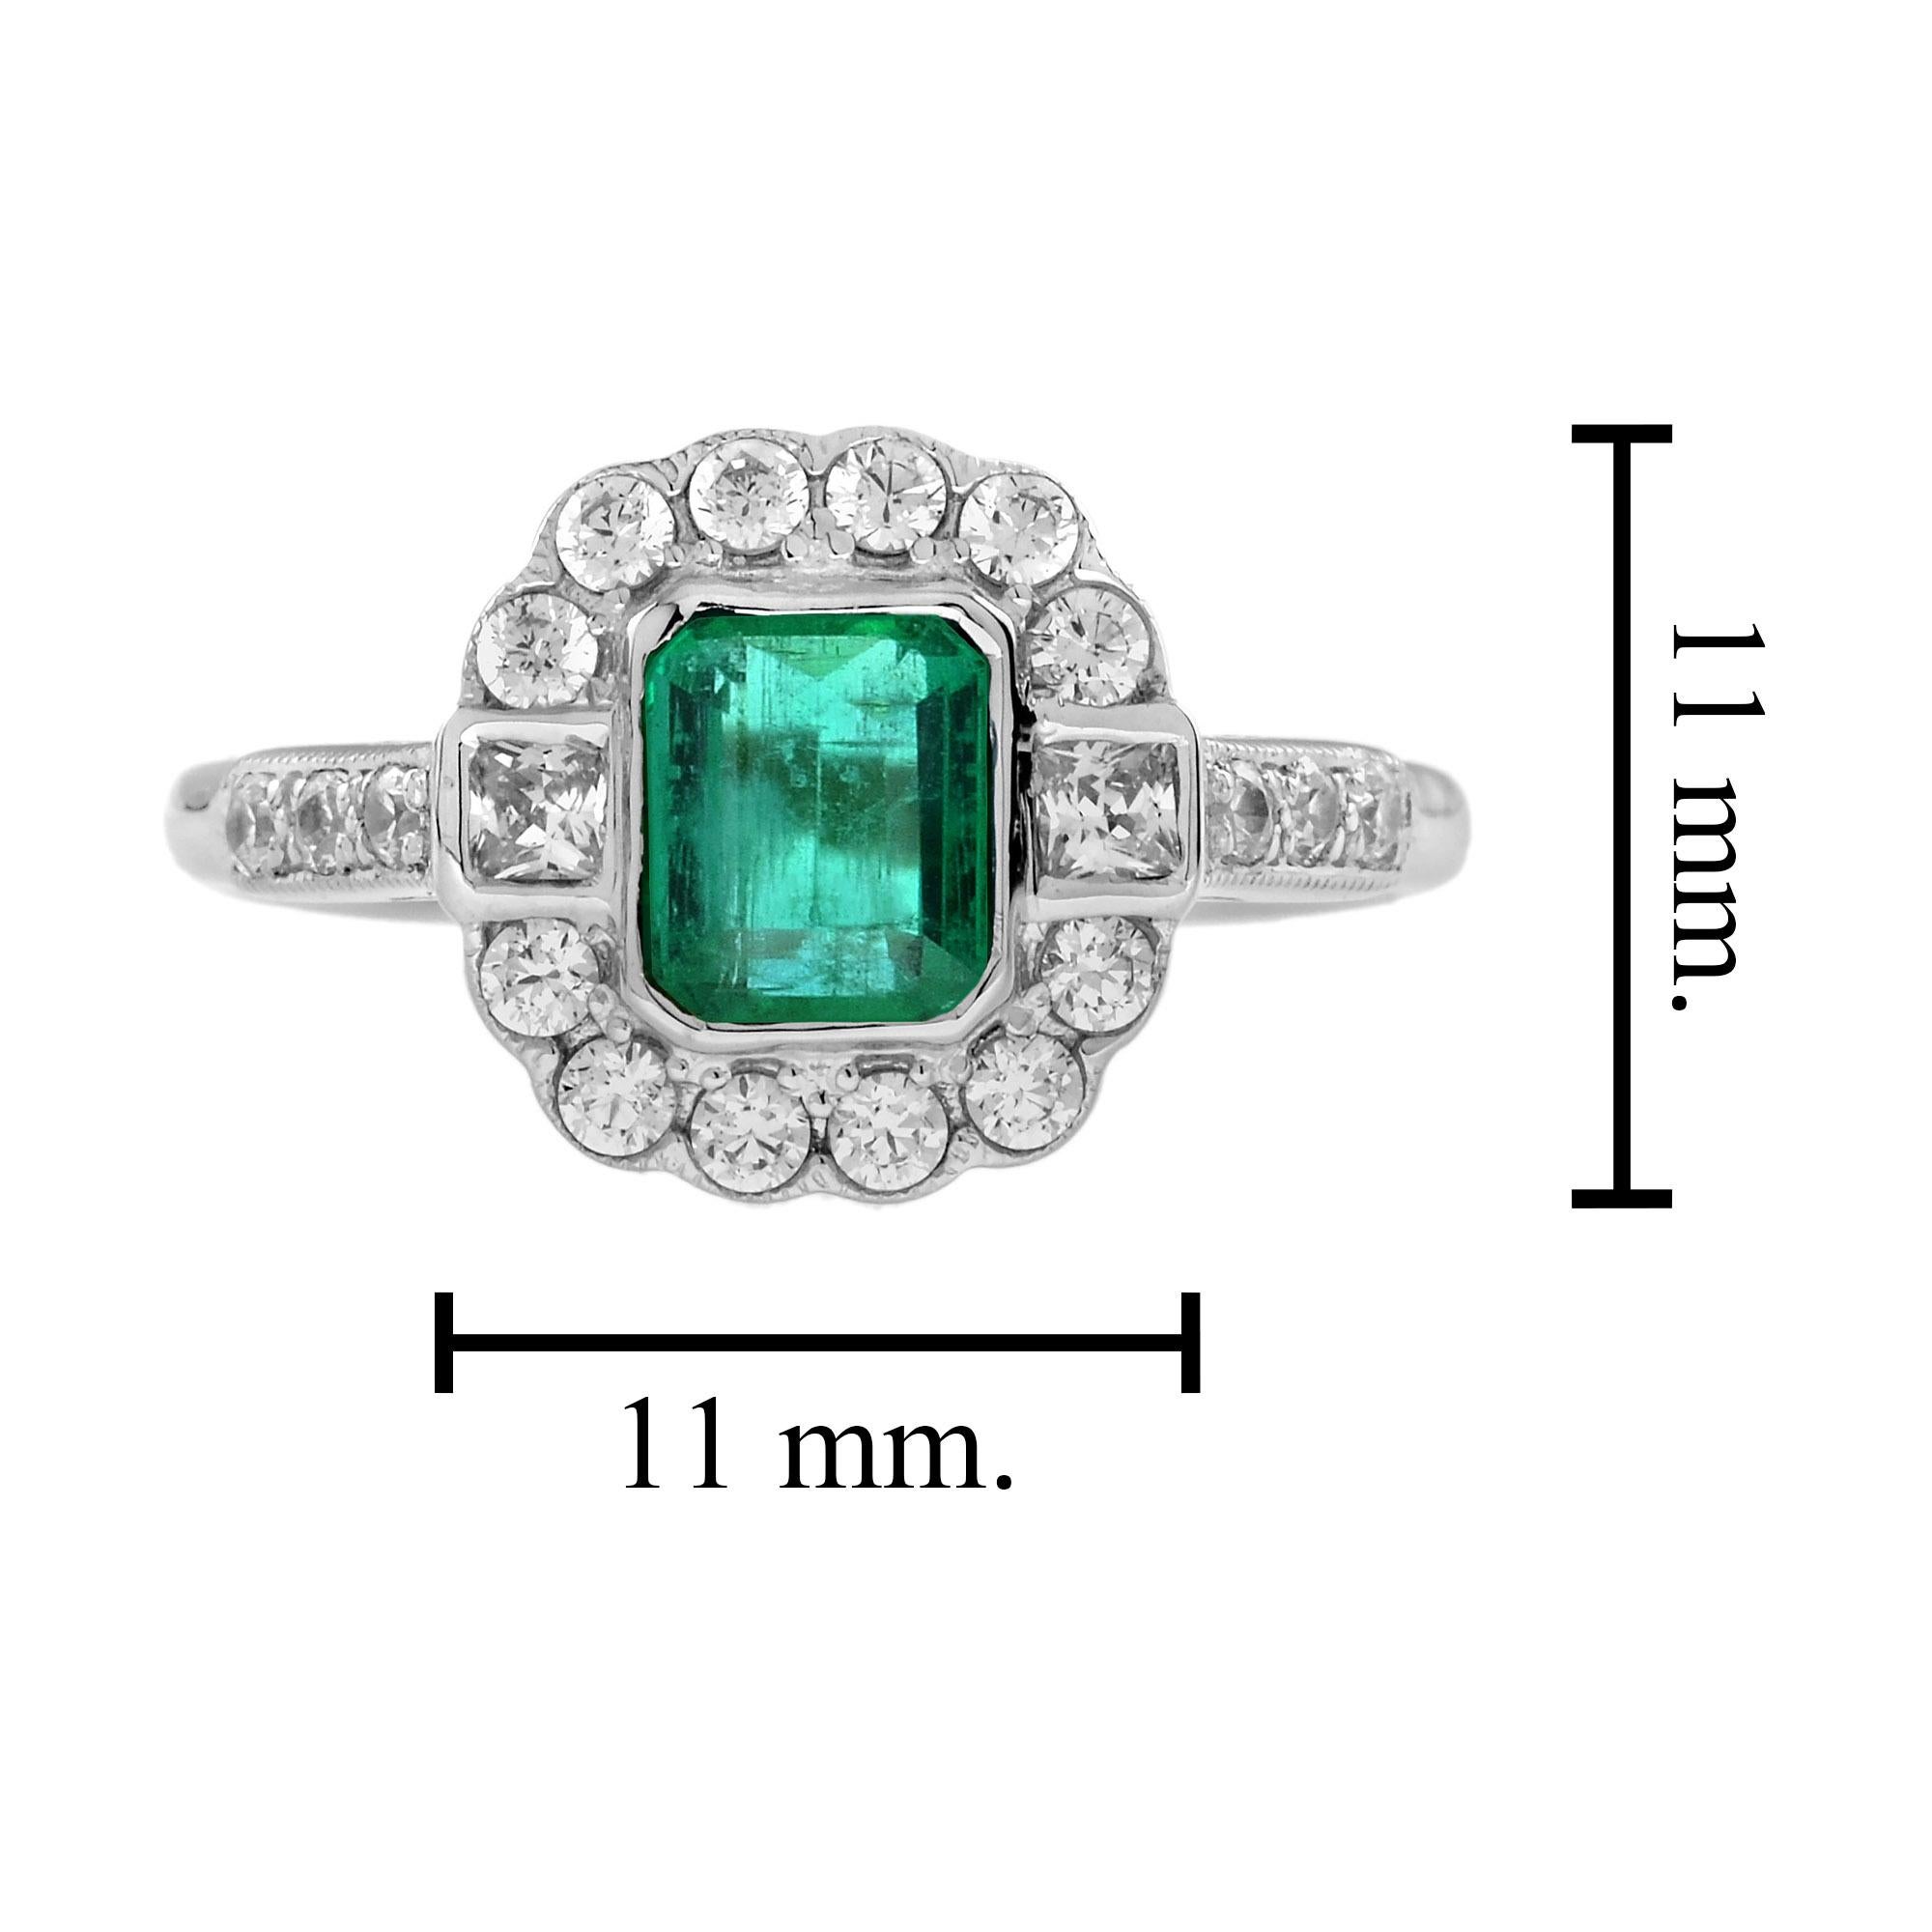 0.60 Ct. Emerald Diamond Halo Antique Style Engagement Ring in 18K White Gold For Sale 1